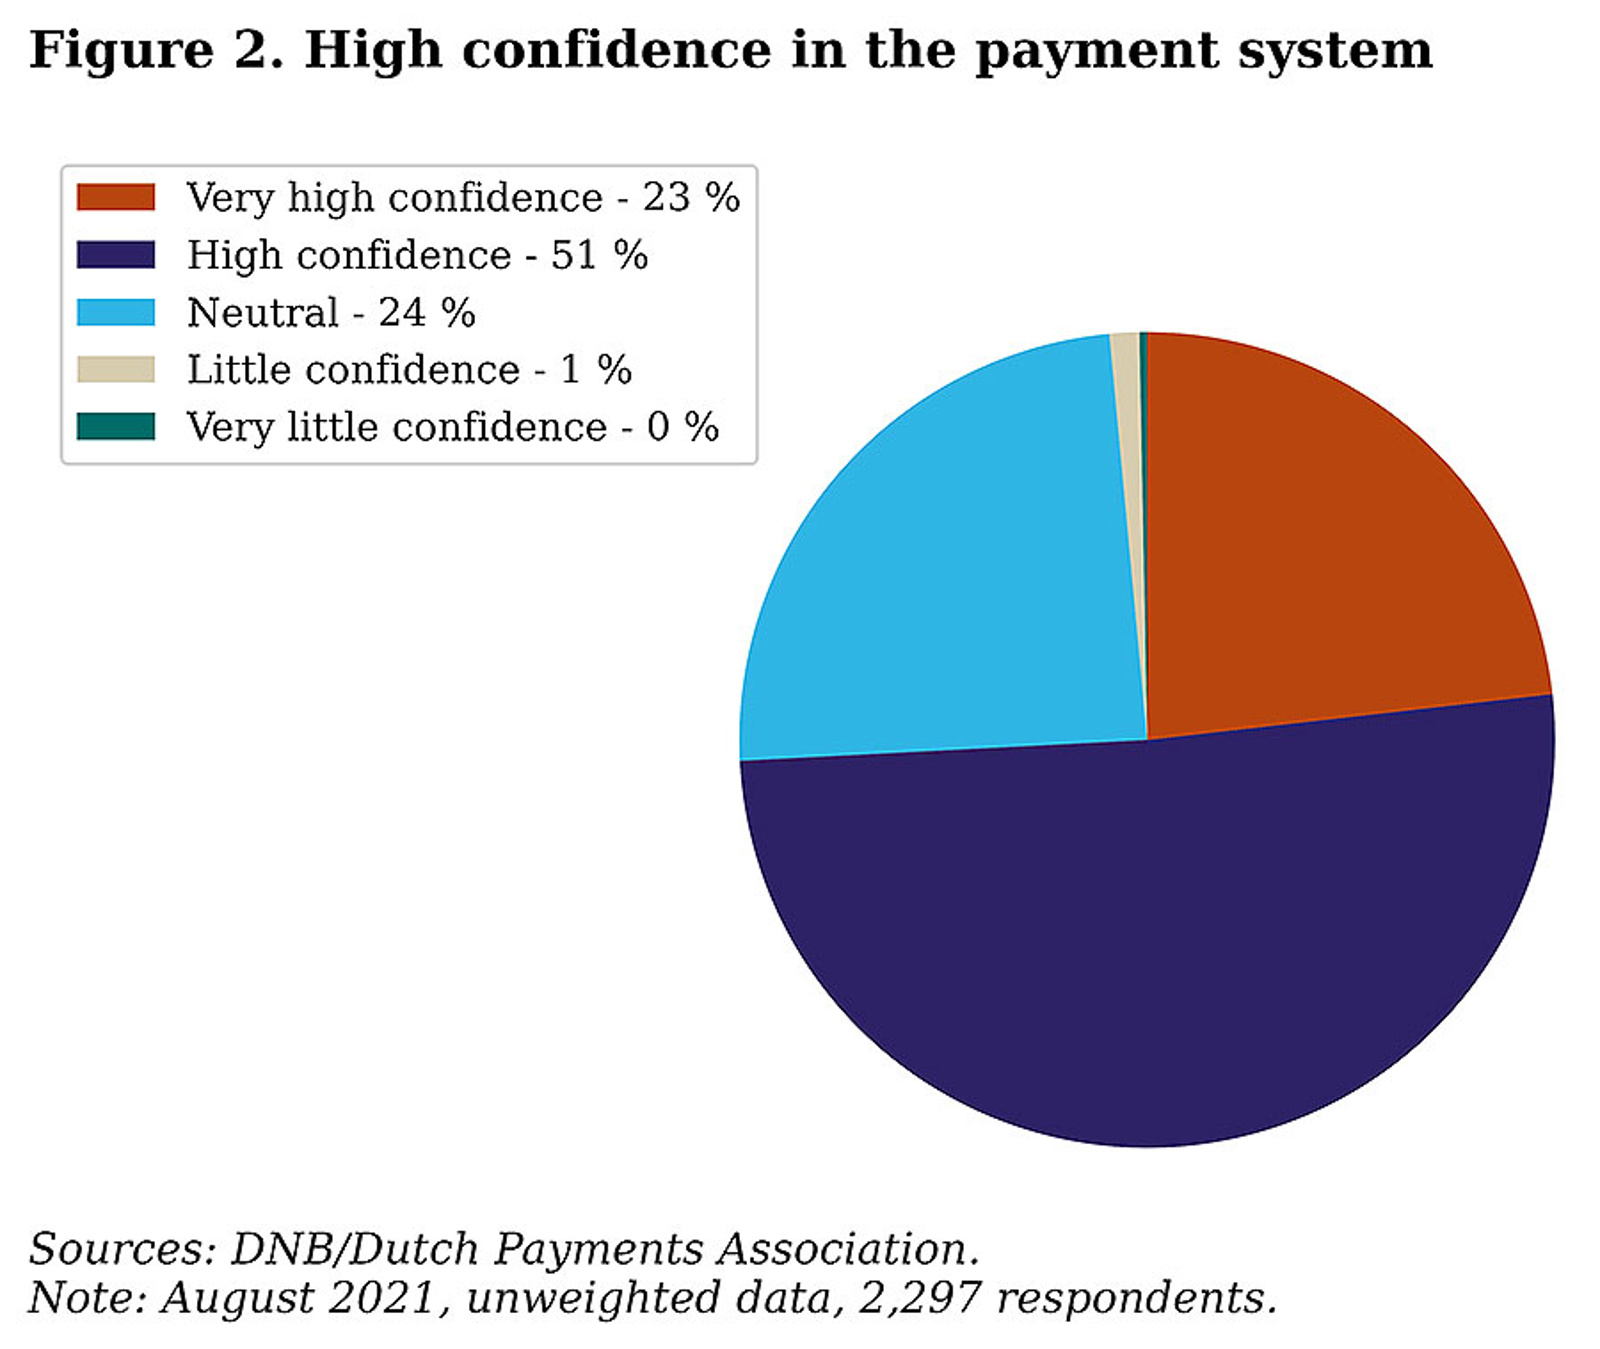 High confidence in the payment system